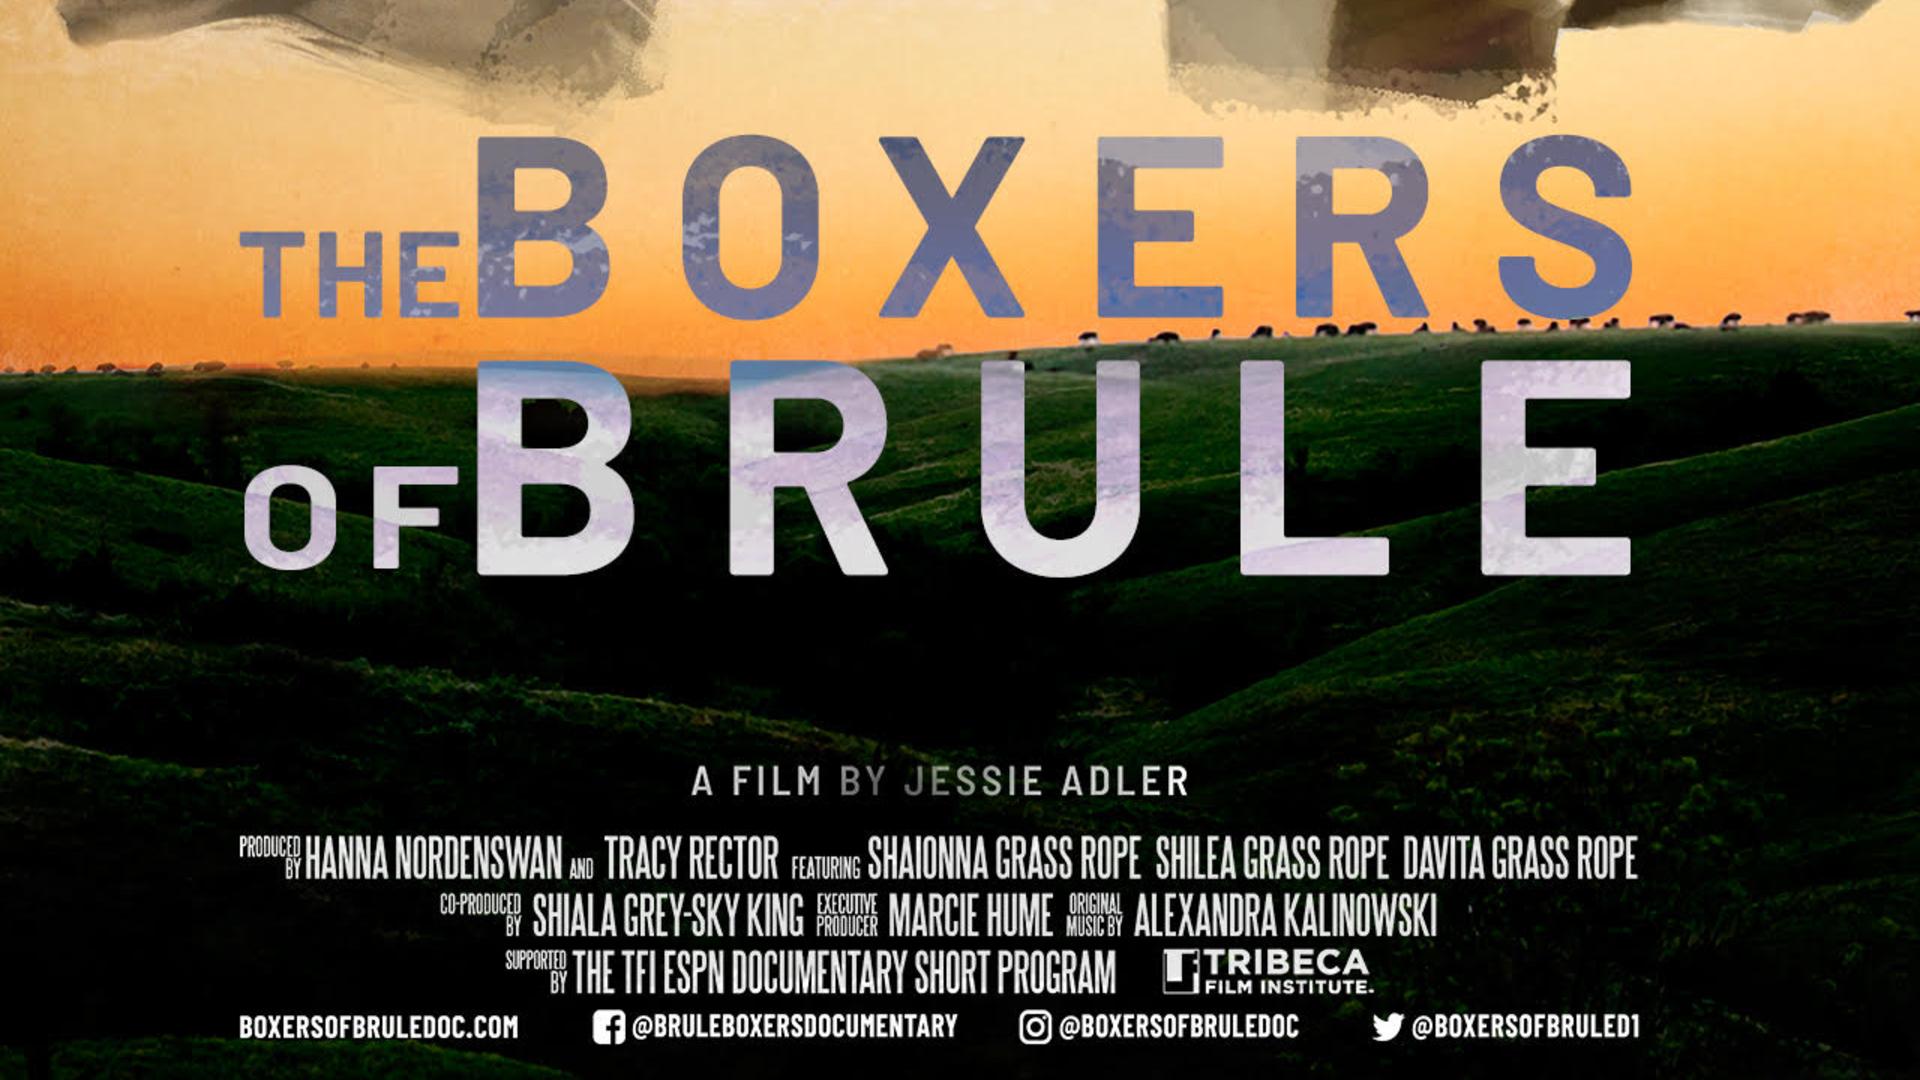 Interview - Boxers of Brule